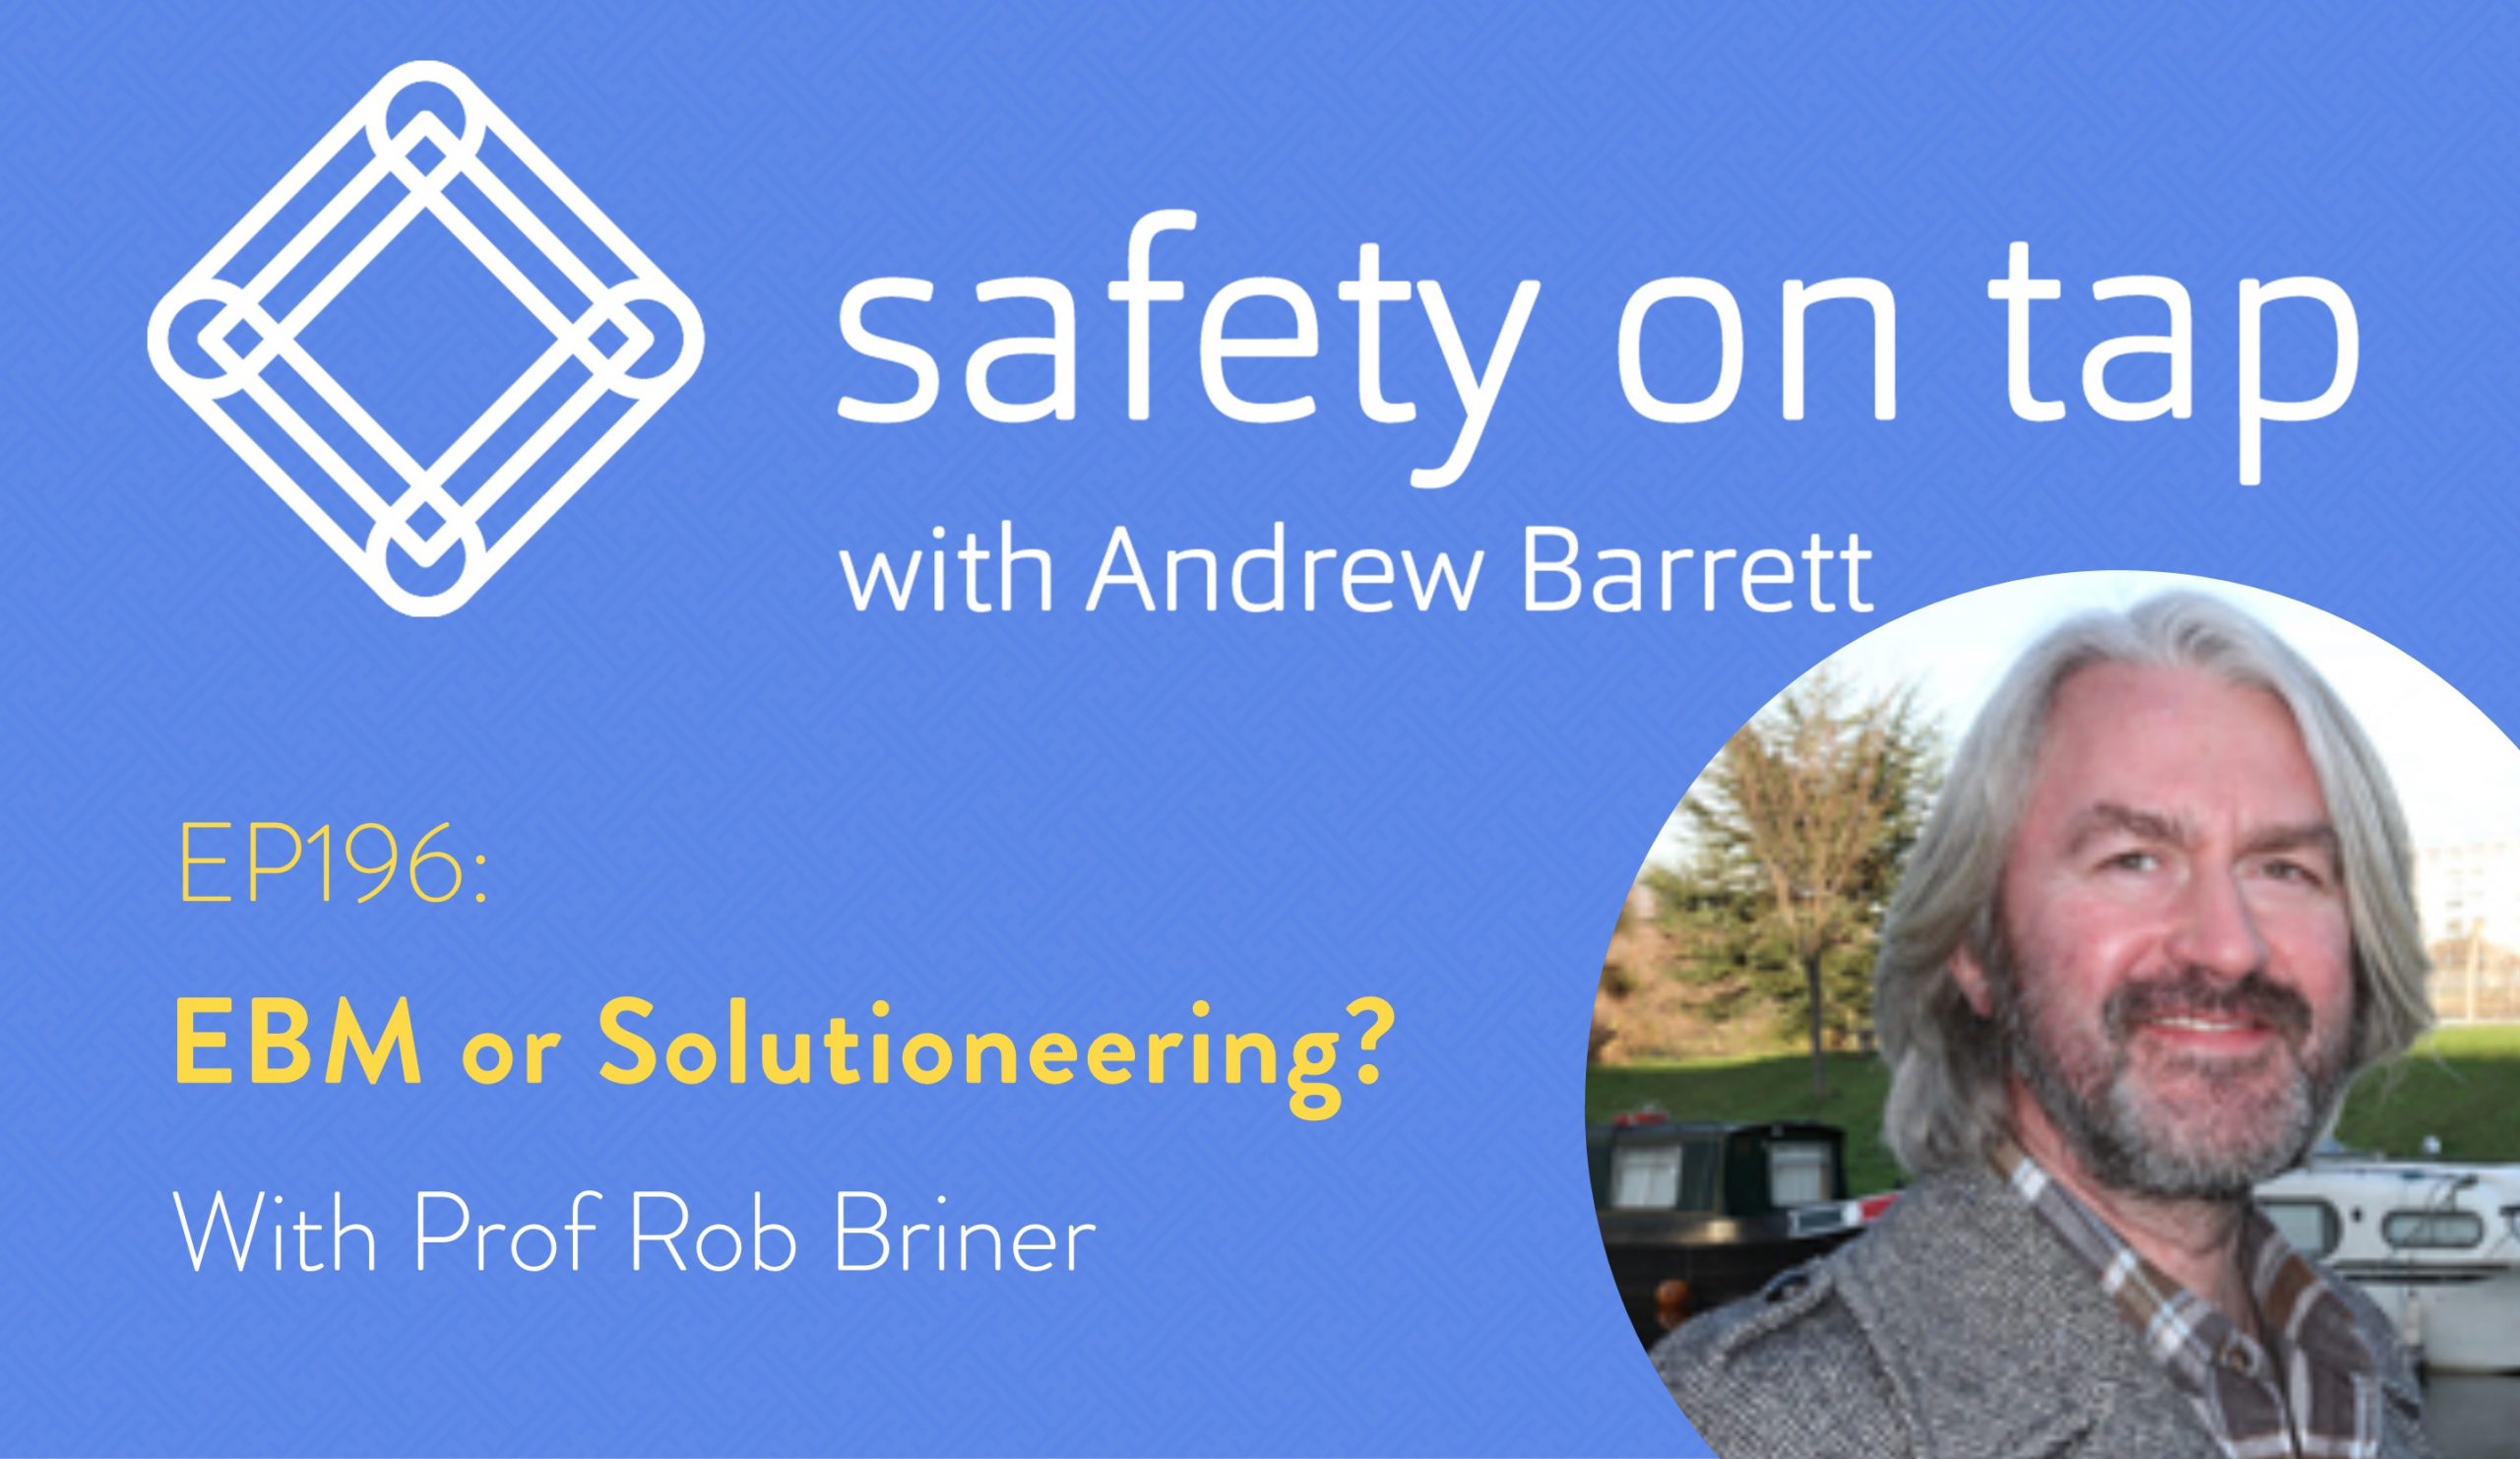 Ep196: EBM or Solutioneering? With Prof Rob Briner